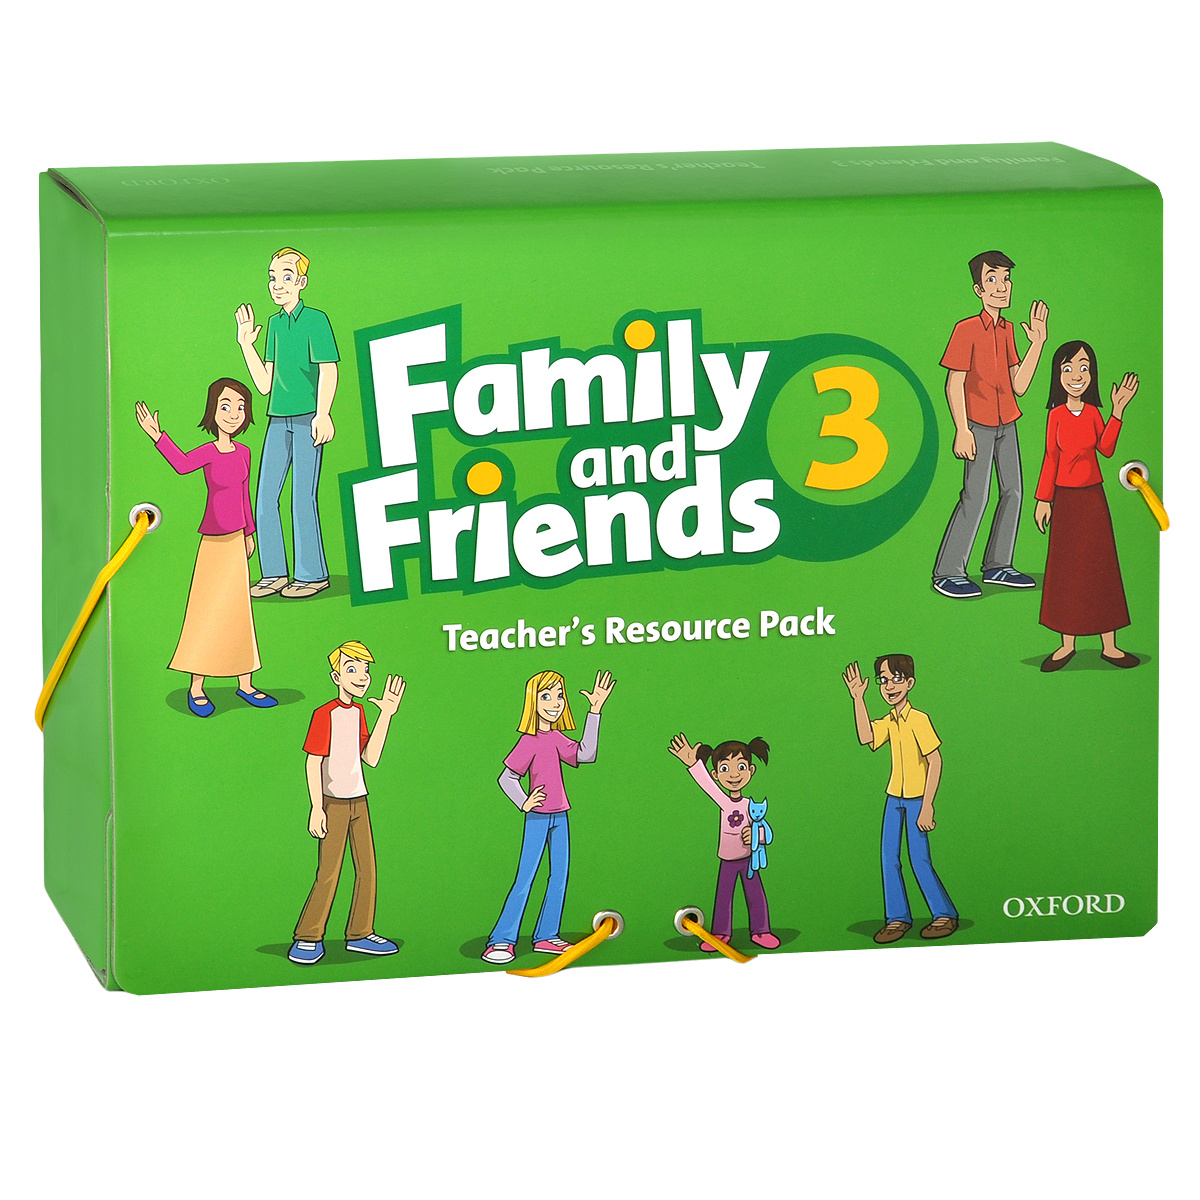 Фэмили френд. Английский Family and friends 3. Oxford Family and friends 3. Фэмили френдс. Oxford Family and friends.